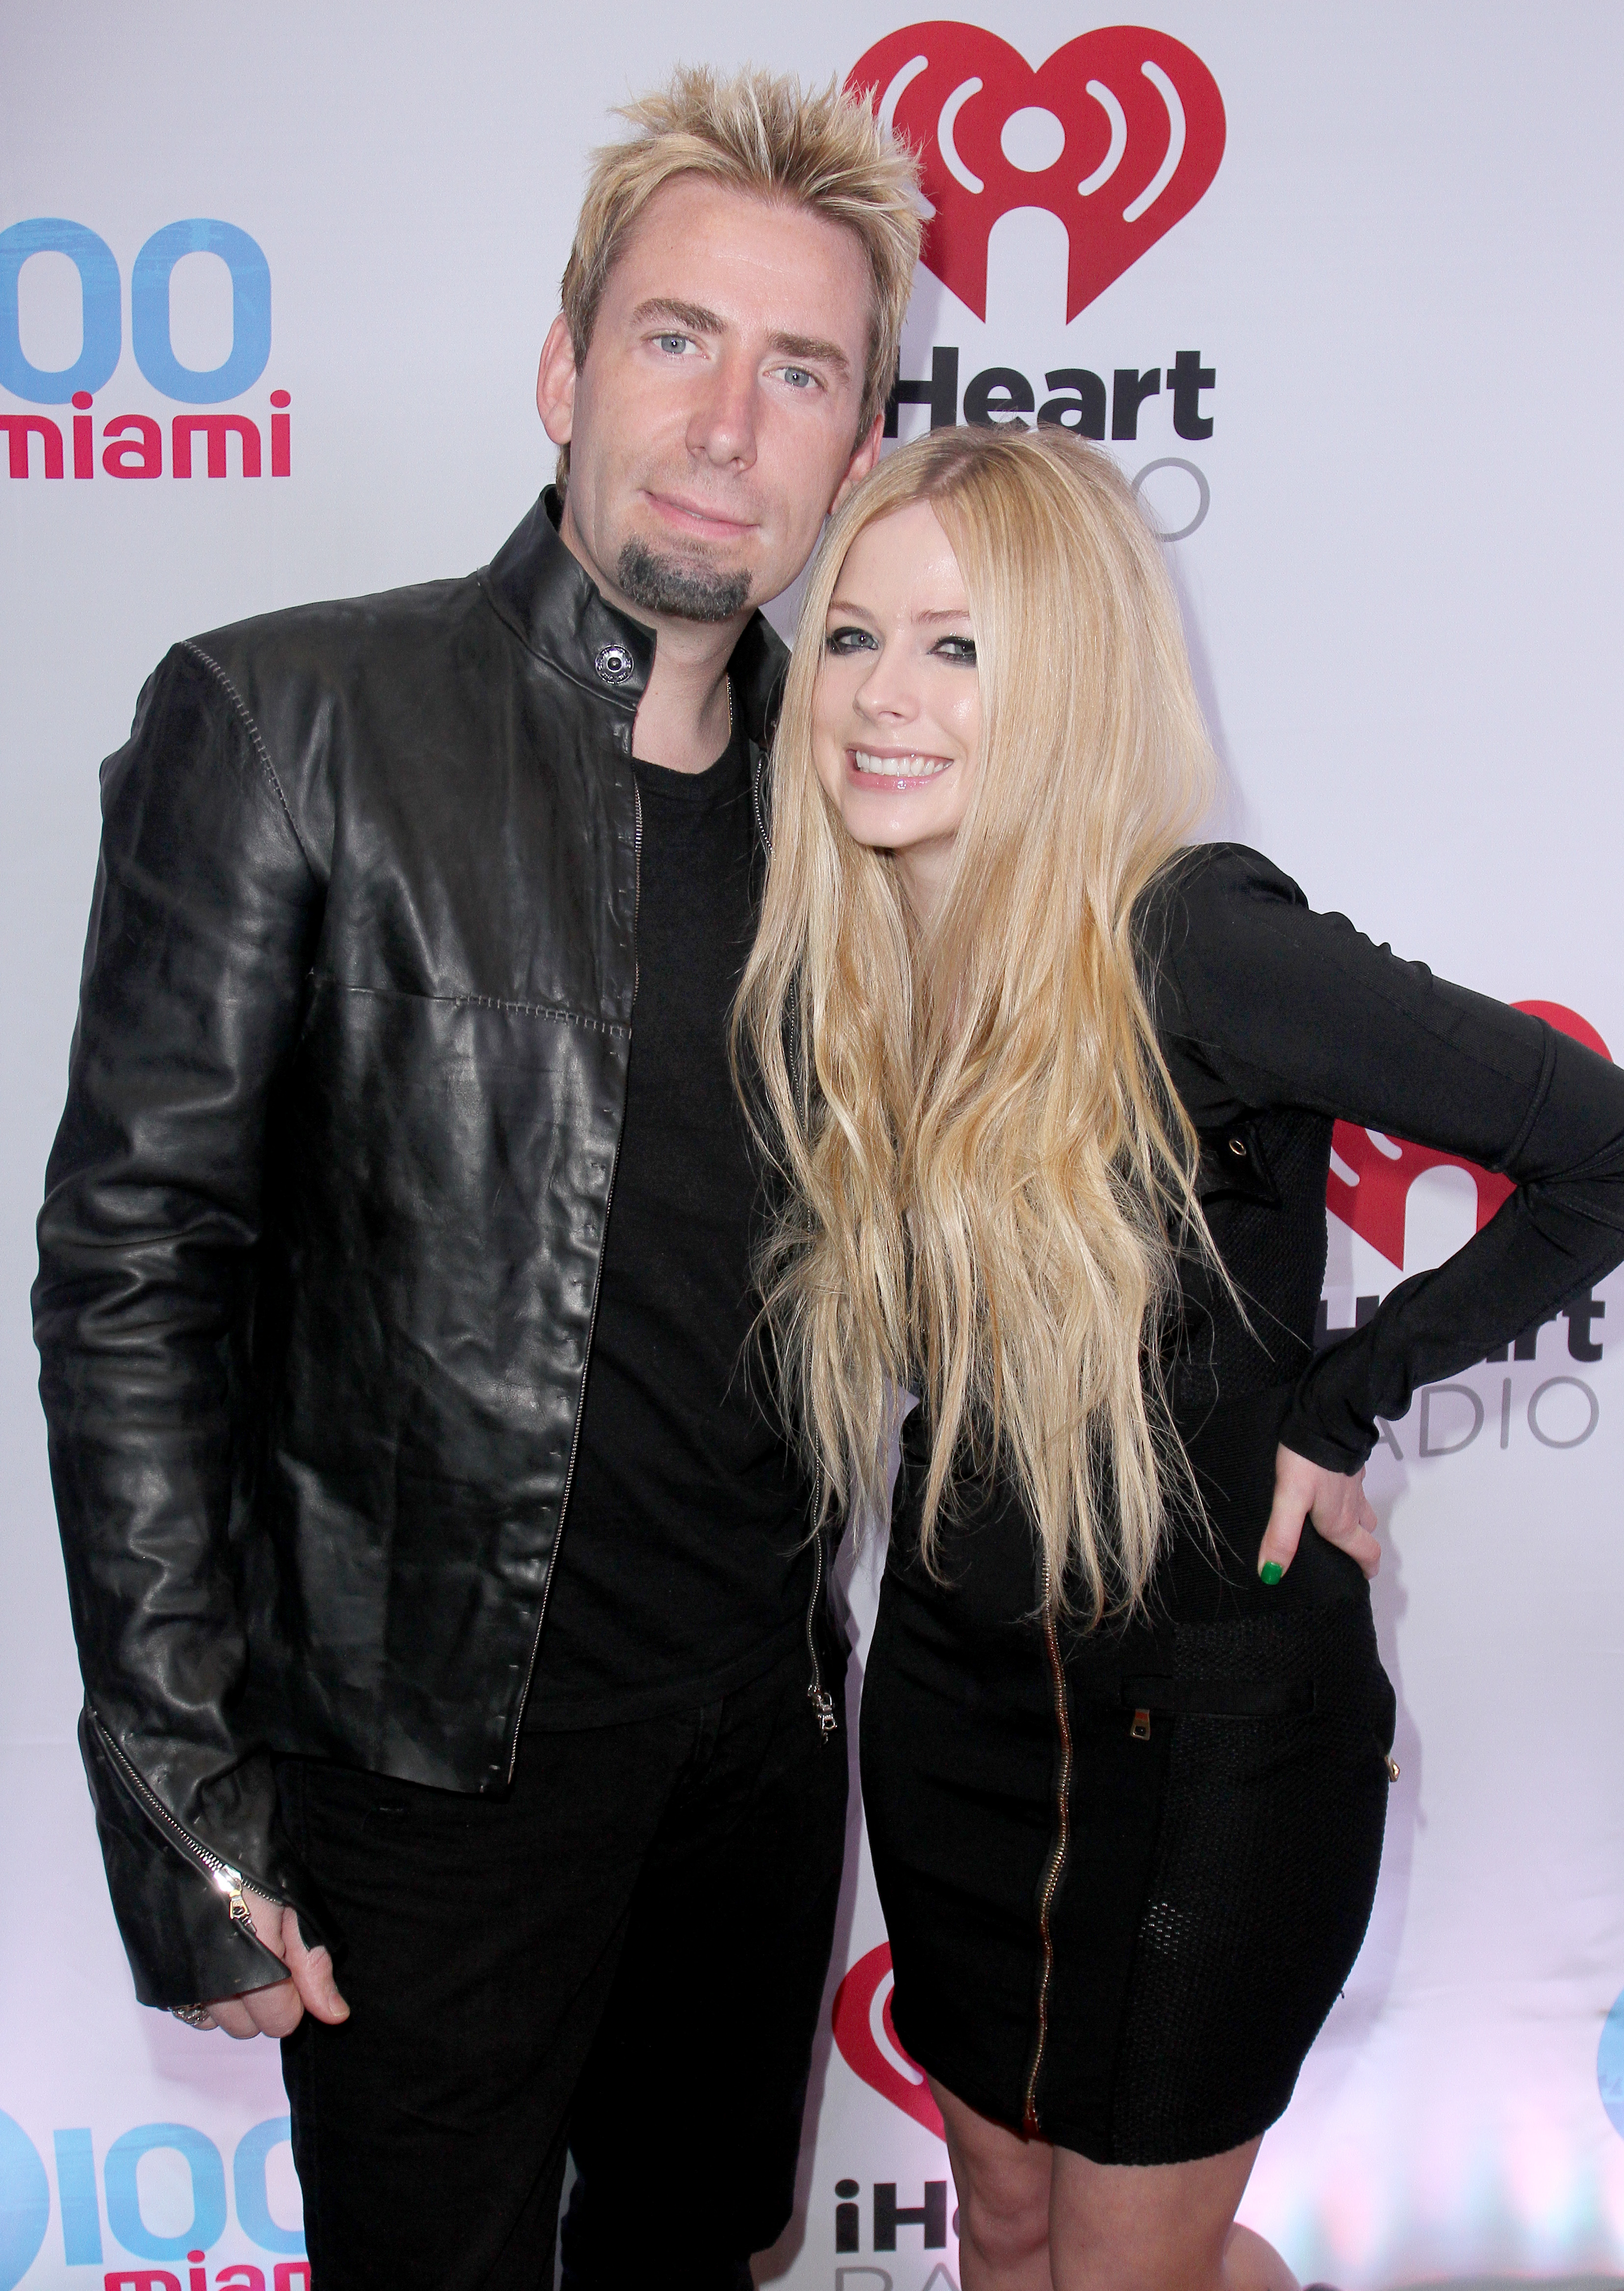 Chad Kroeger and Avil Lavigne at the Jingle Ball in 2013